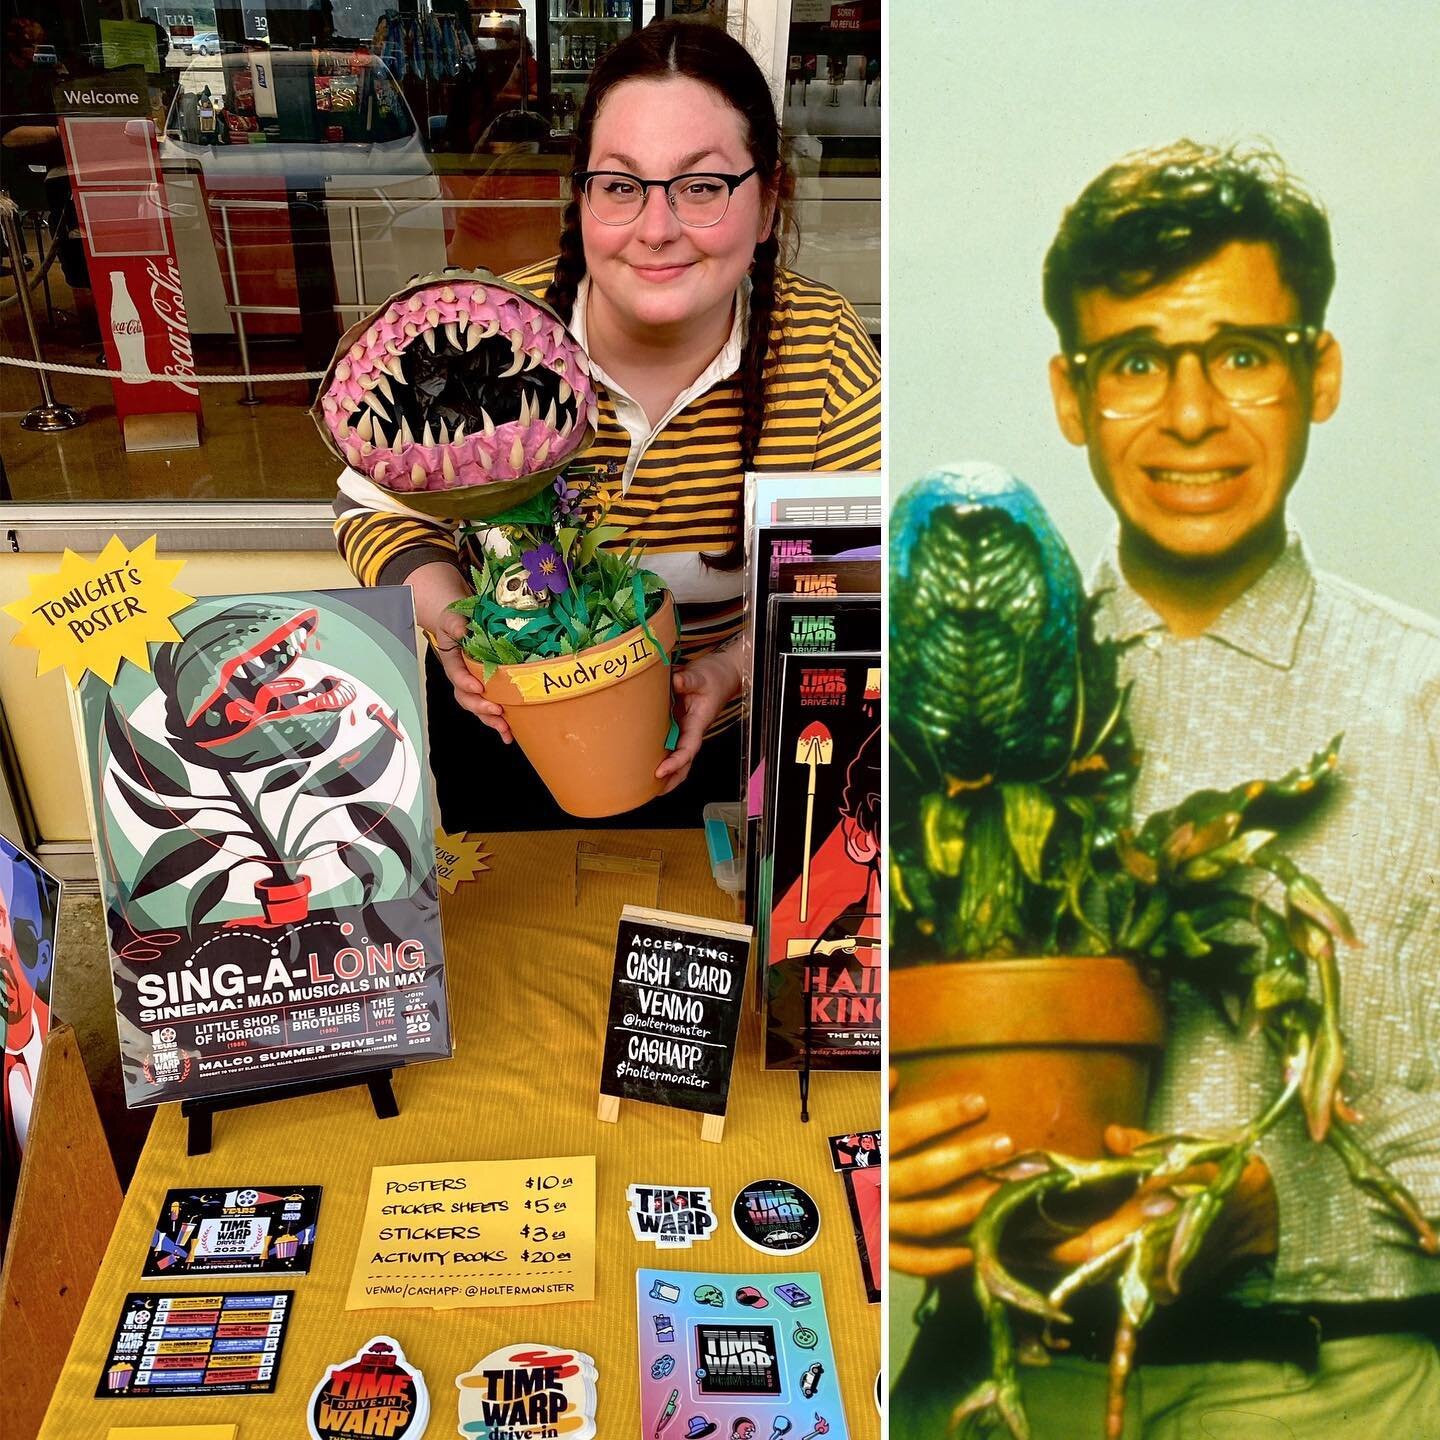 channeling Seymour Krelborn at last night&rsquo;s Time Warp Drive-In! 🌿🩸

I assembled my Audrey II by combining this incredible papier-m&acirc;ch&eacute; toothy monster by @maedchen126 (from @monster.market 2018!) with a planter and random stuff in